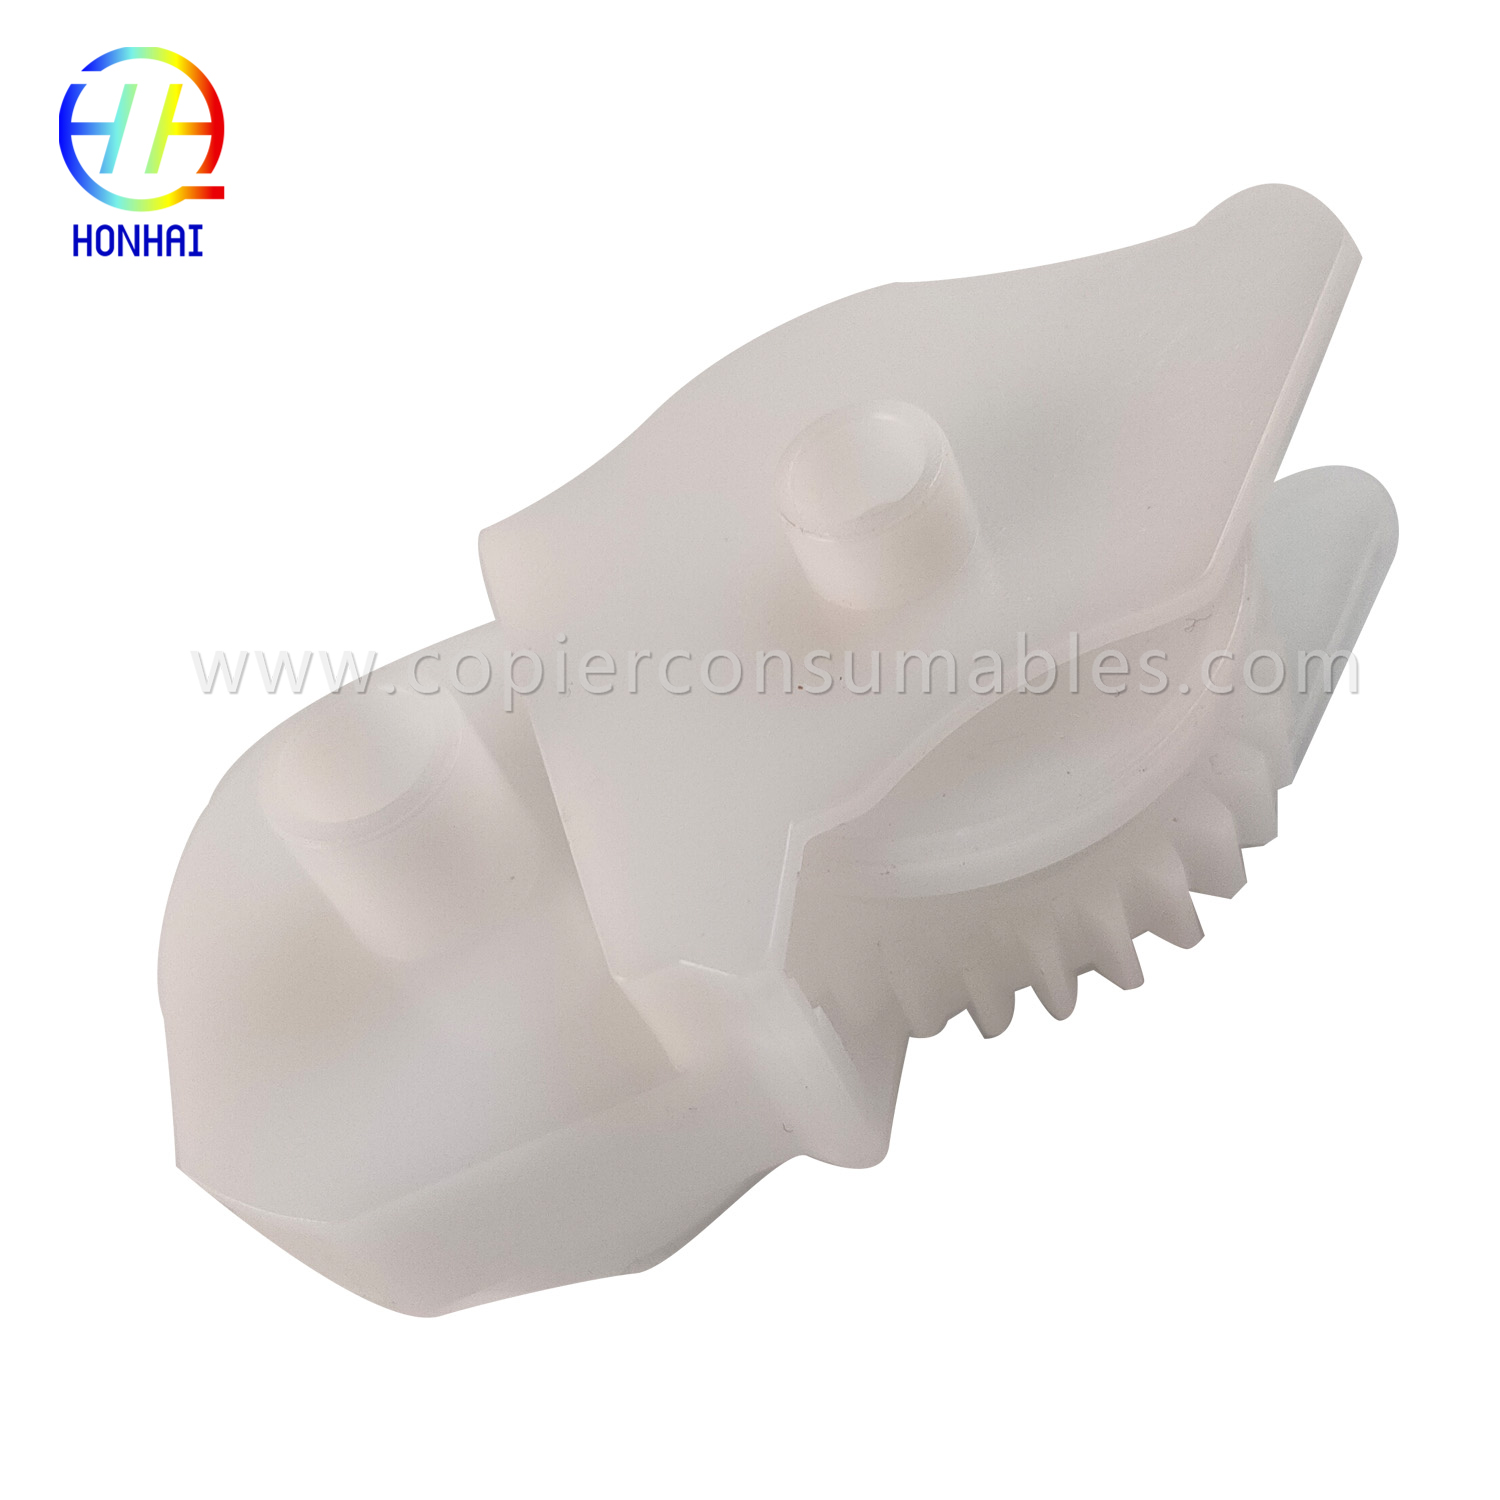 Fuser Drive Gear with Frame 27T សម្រាប់ HP Lj PRO M400 Lj M401 M425 RC3-2514 Ru7-0375 Arm Swing Gear(3.jpg-1) 拷贝